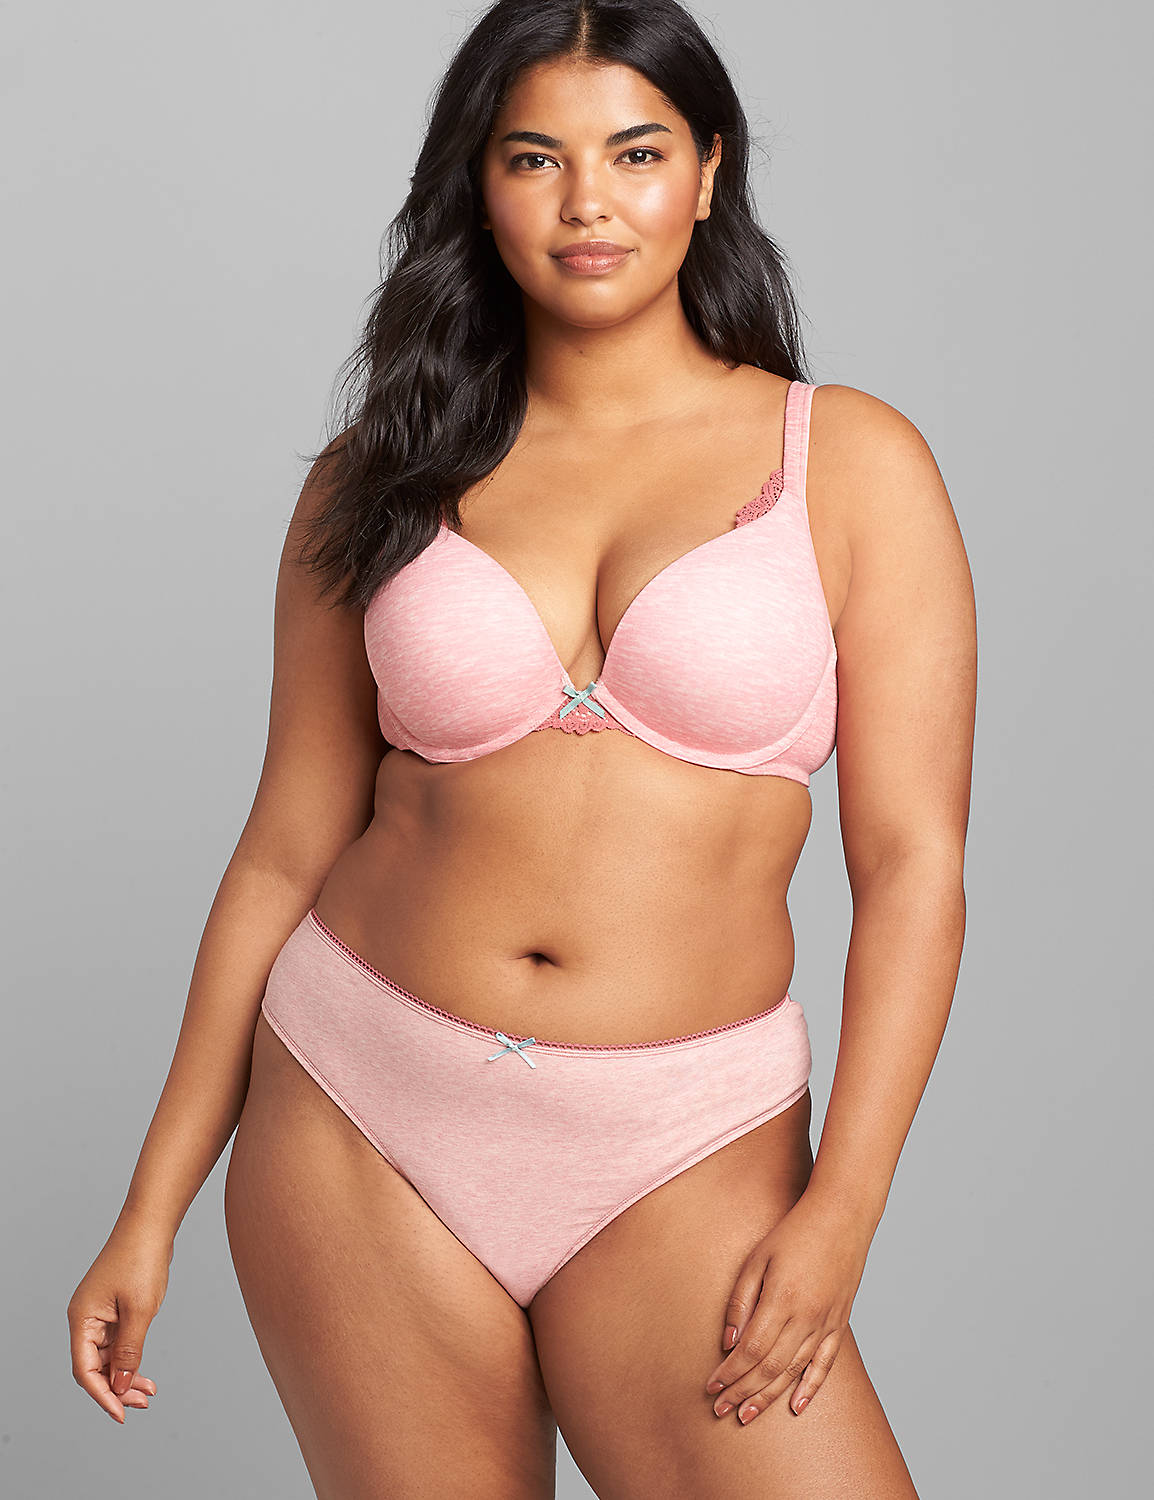 Cotton Boost Plunge Bra Product Image 1